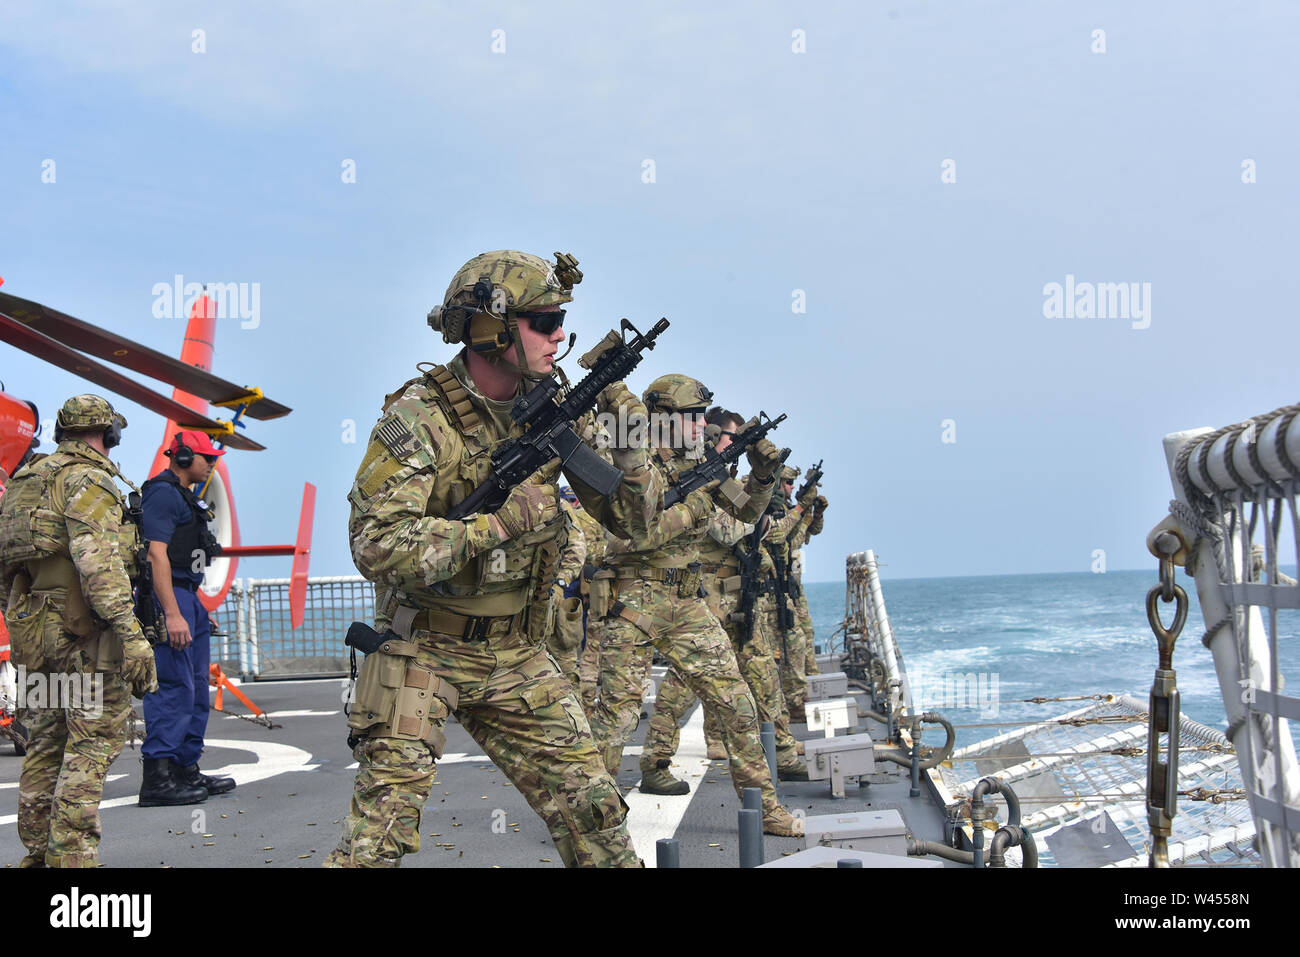 EAST CHINA SEA--Members of Maritime Security and Response Team West exercise with sidearms and rifles from the flight deck of U.S. Coast Guard Cutter Bertholf (WMSL 750) Feb. 25, 2019.   Bertholf is on a months-long deployment in support of the U.S. Navy's 7th Fleet. U.S. Coast Guard photo by Chief Petty Officer John Masson. Stock Photo